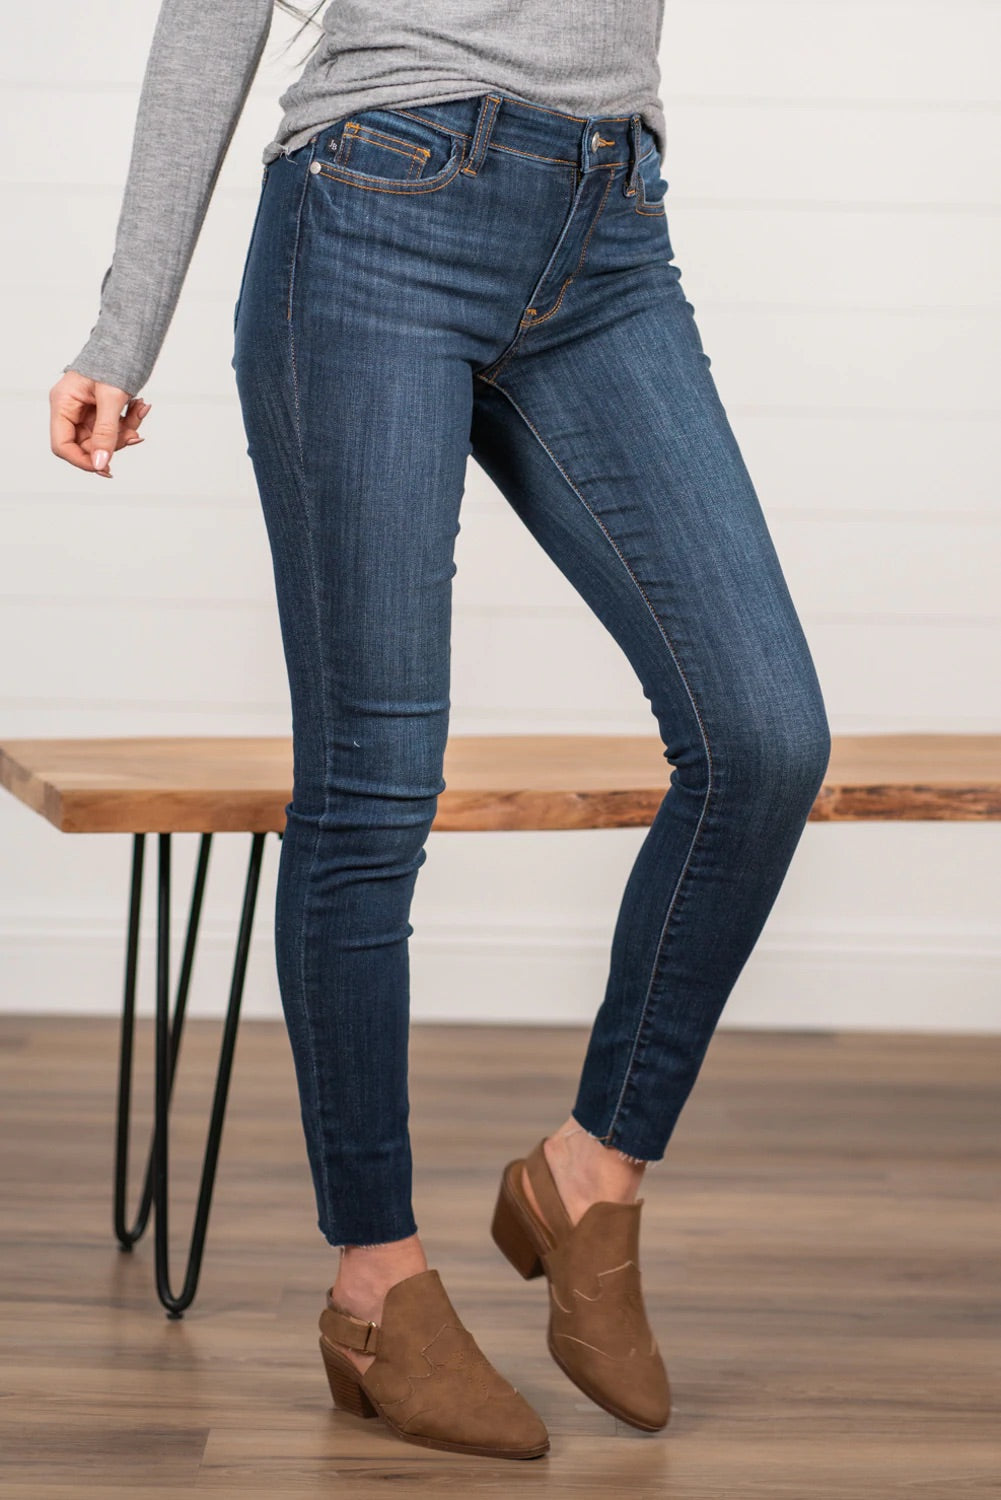 Stretchy Solid Jeans – The Fashionable